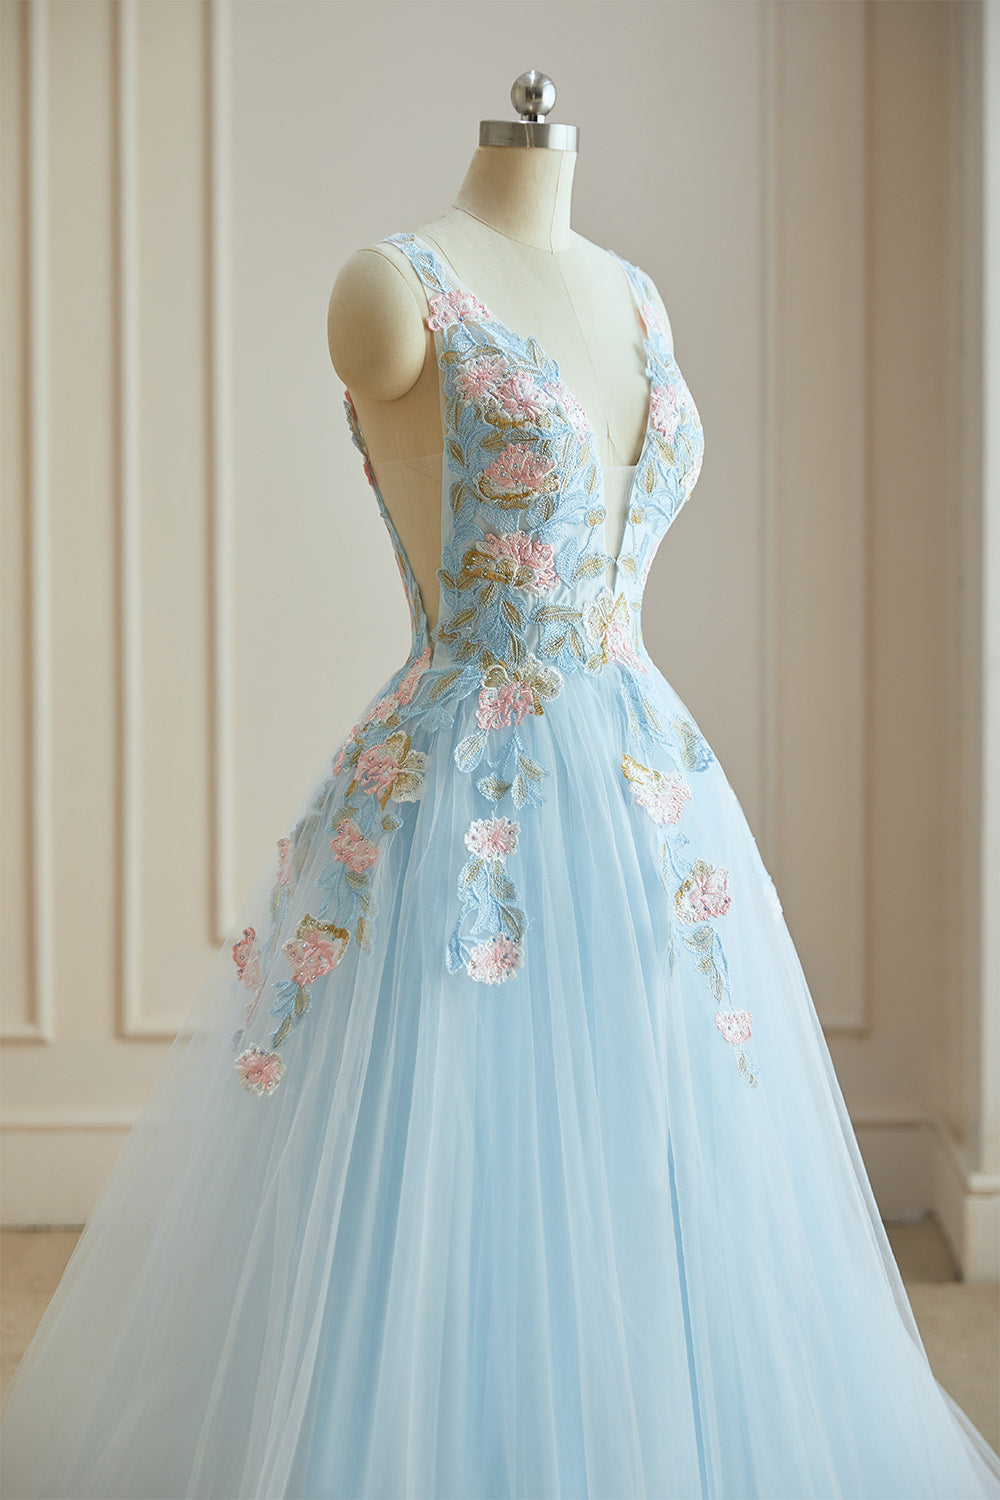 Hebochic A-Line Blue Princess Tulle Long Prom Dress With Appliques